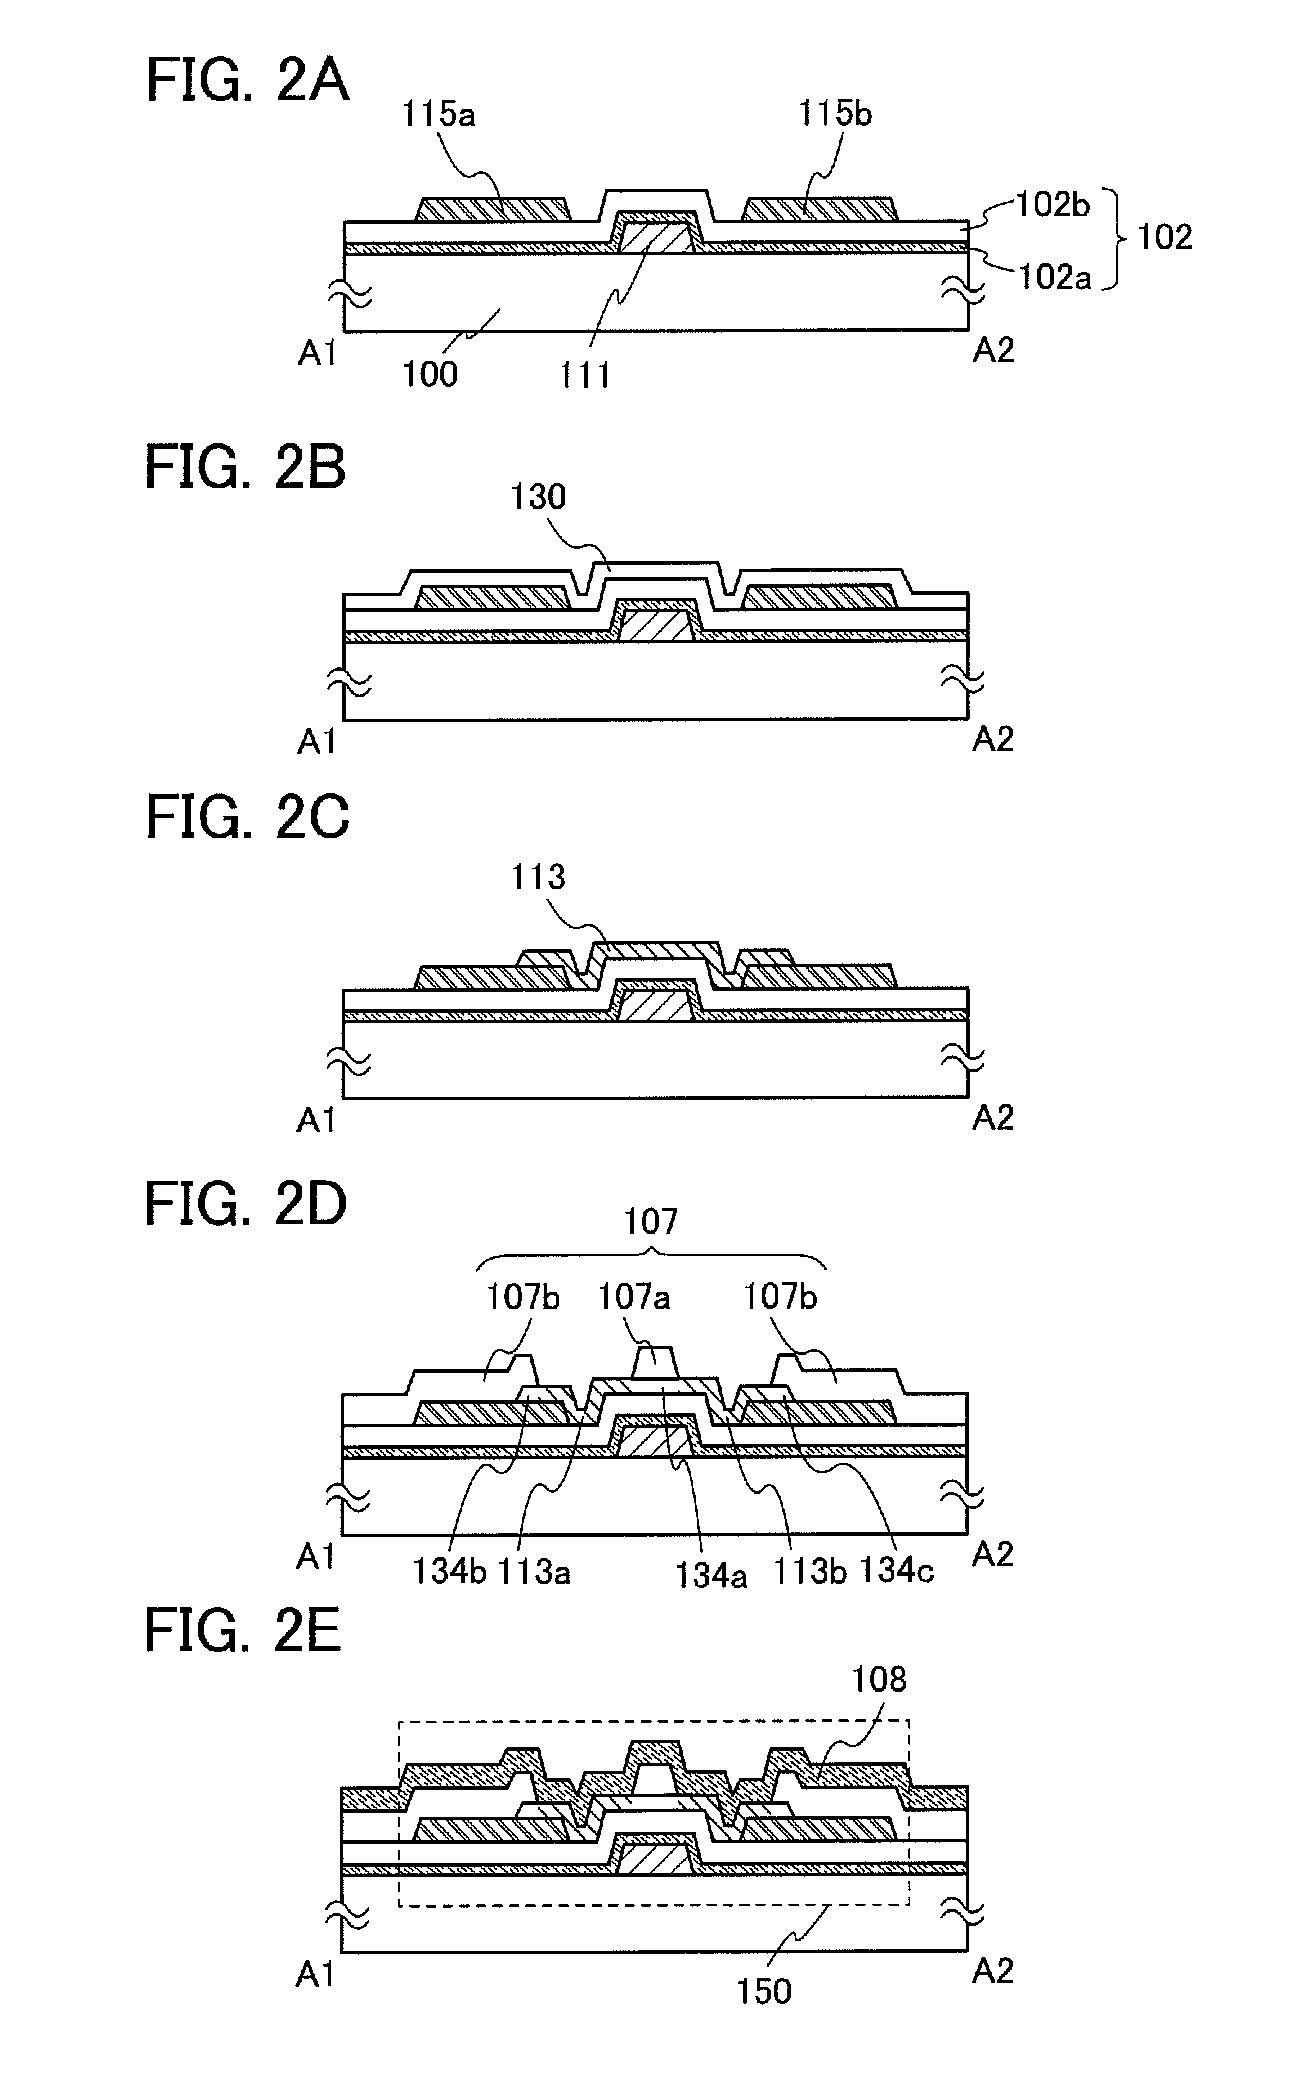 Oxide semiconductor device